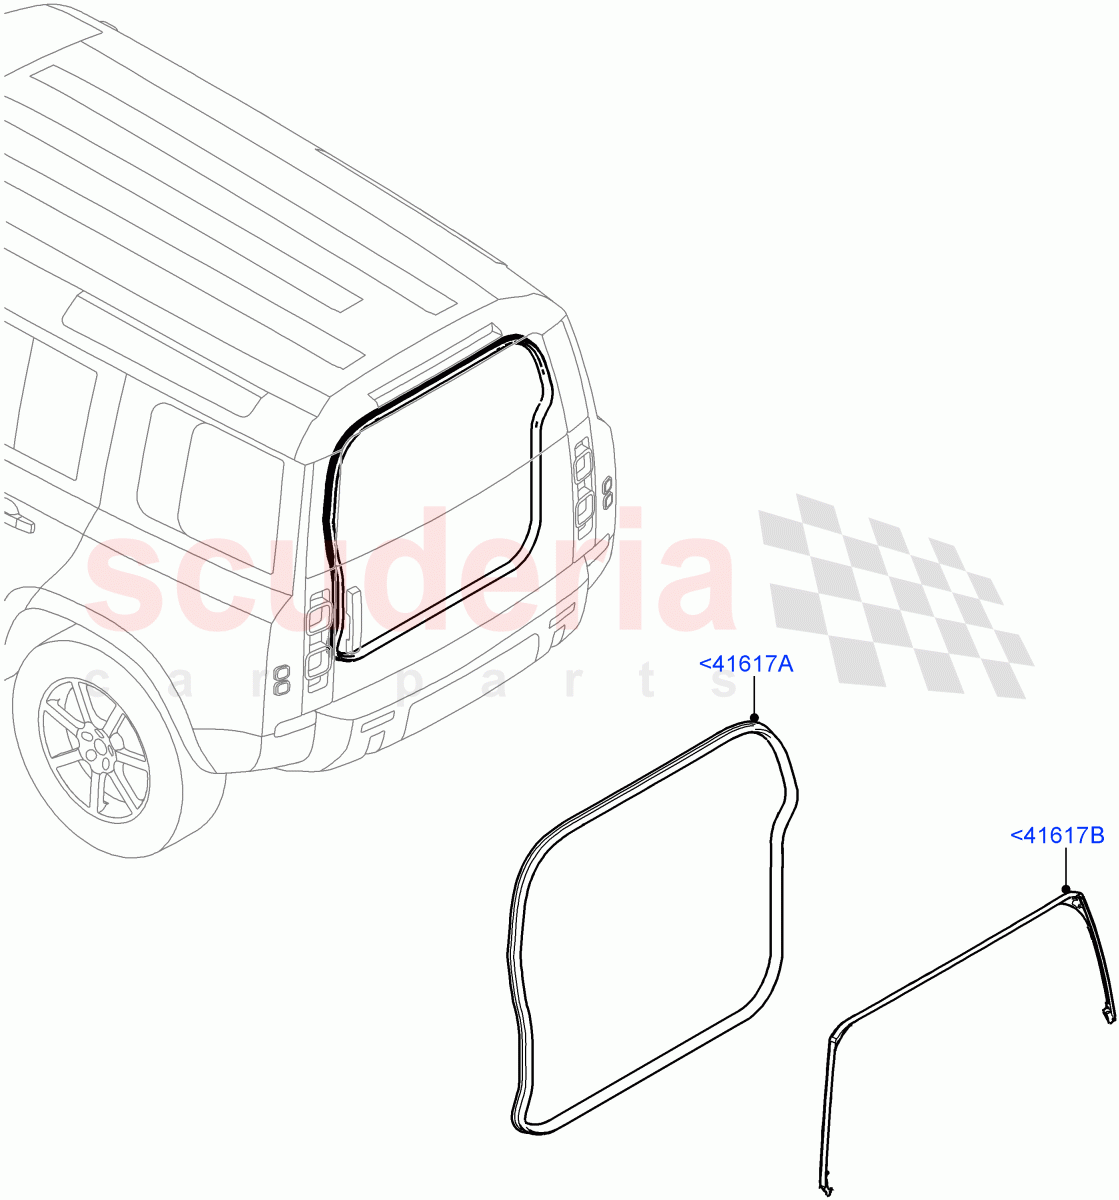 Luggage Compartment Door(Weatherstrips And Seals) of Land Rover Land Rover Defender (2020+) [5.0 OHC SGDI SC V8 Petrol]